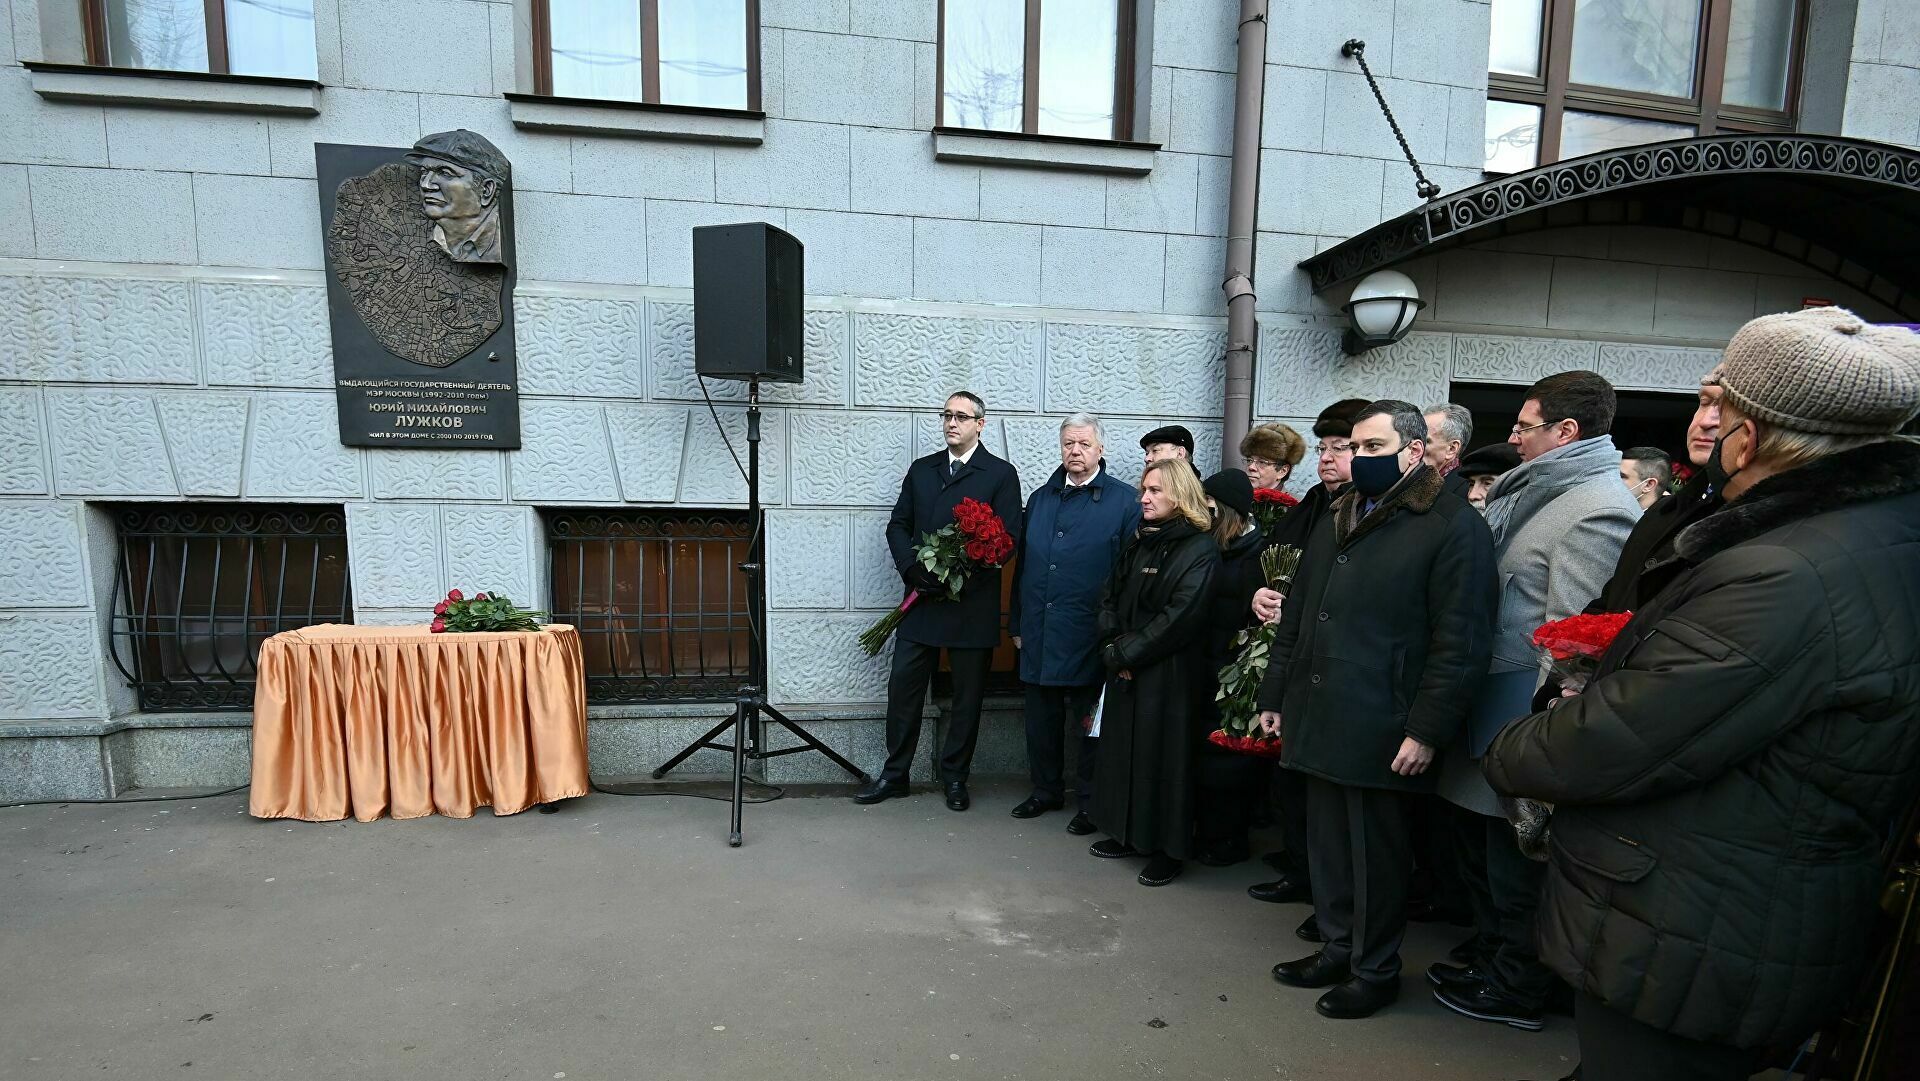 A memorial tablet to Yuri Luzhkov was installed in the center of Moscow